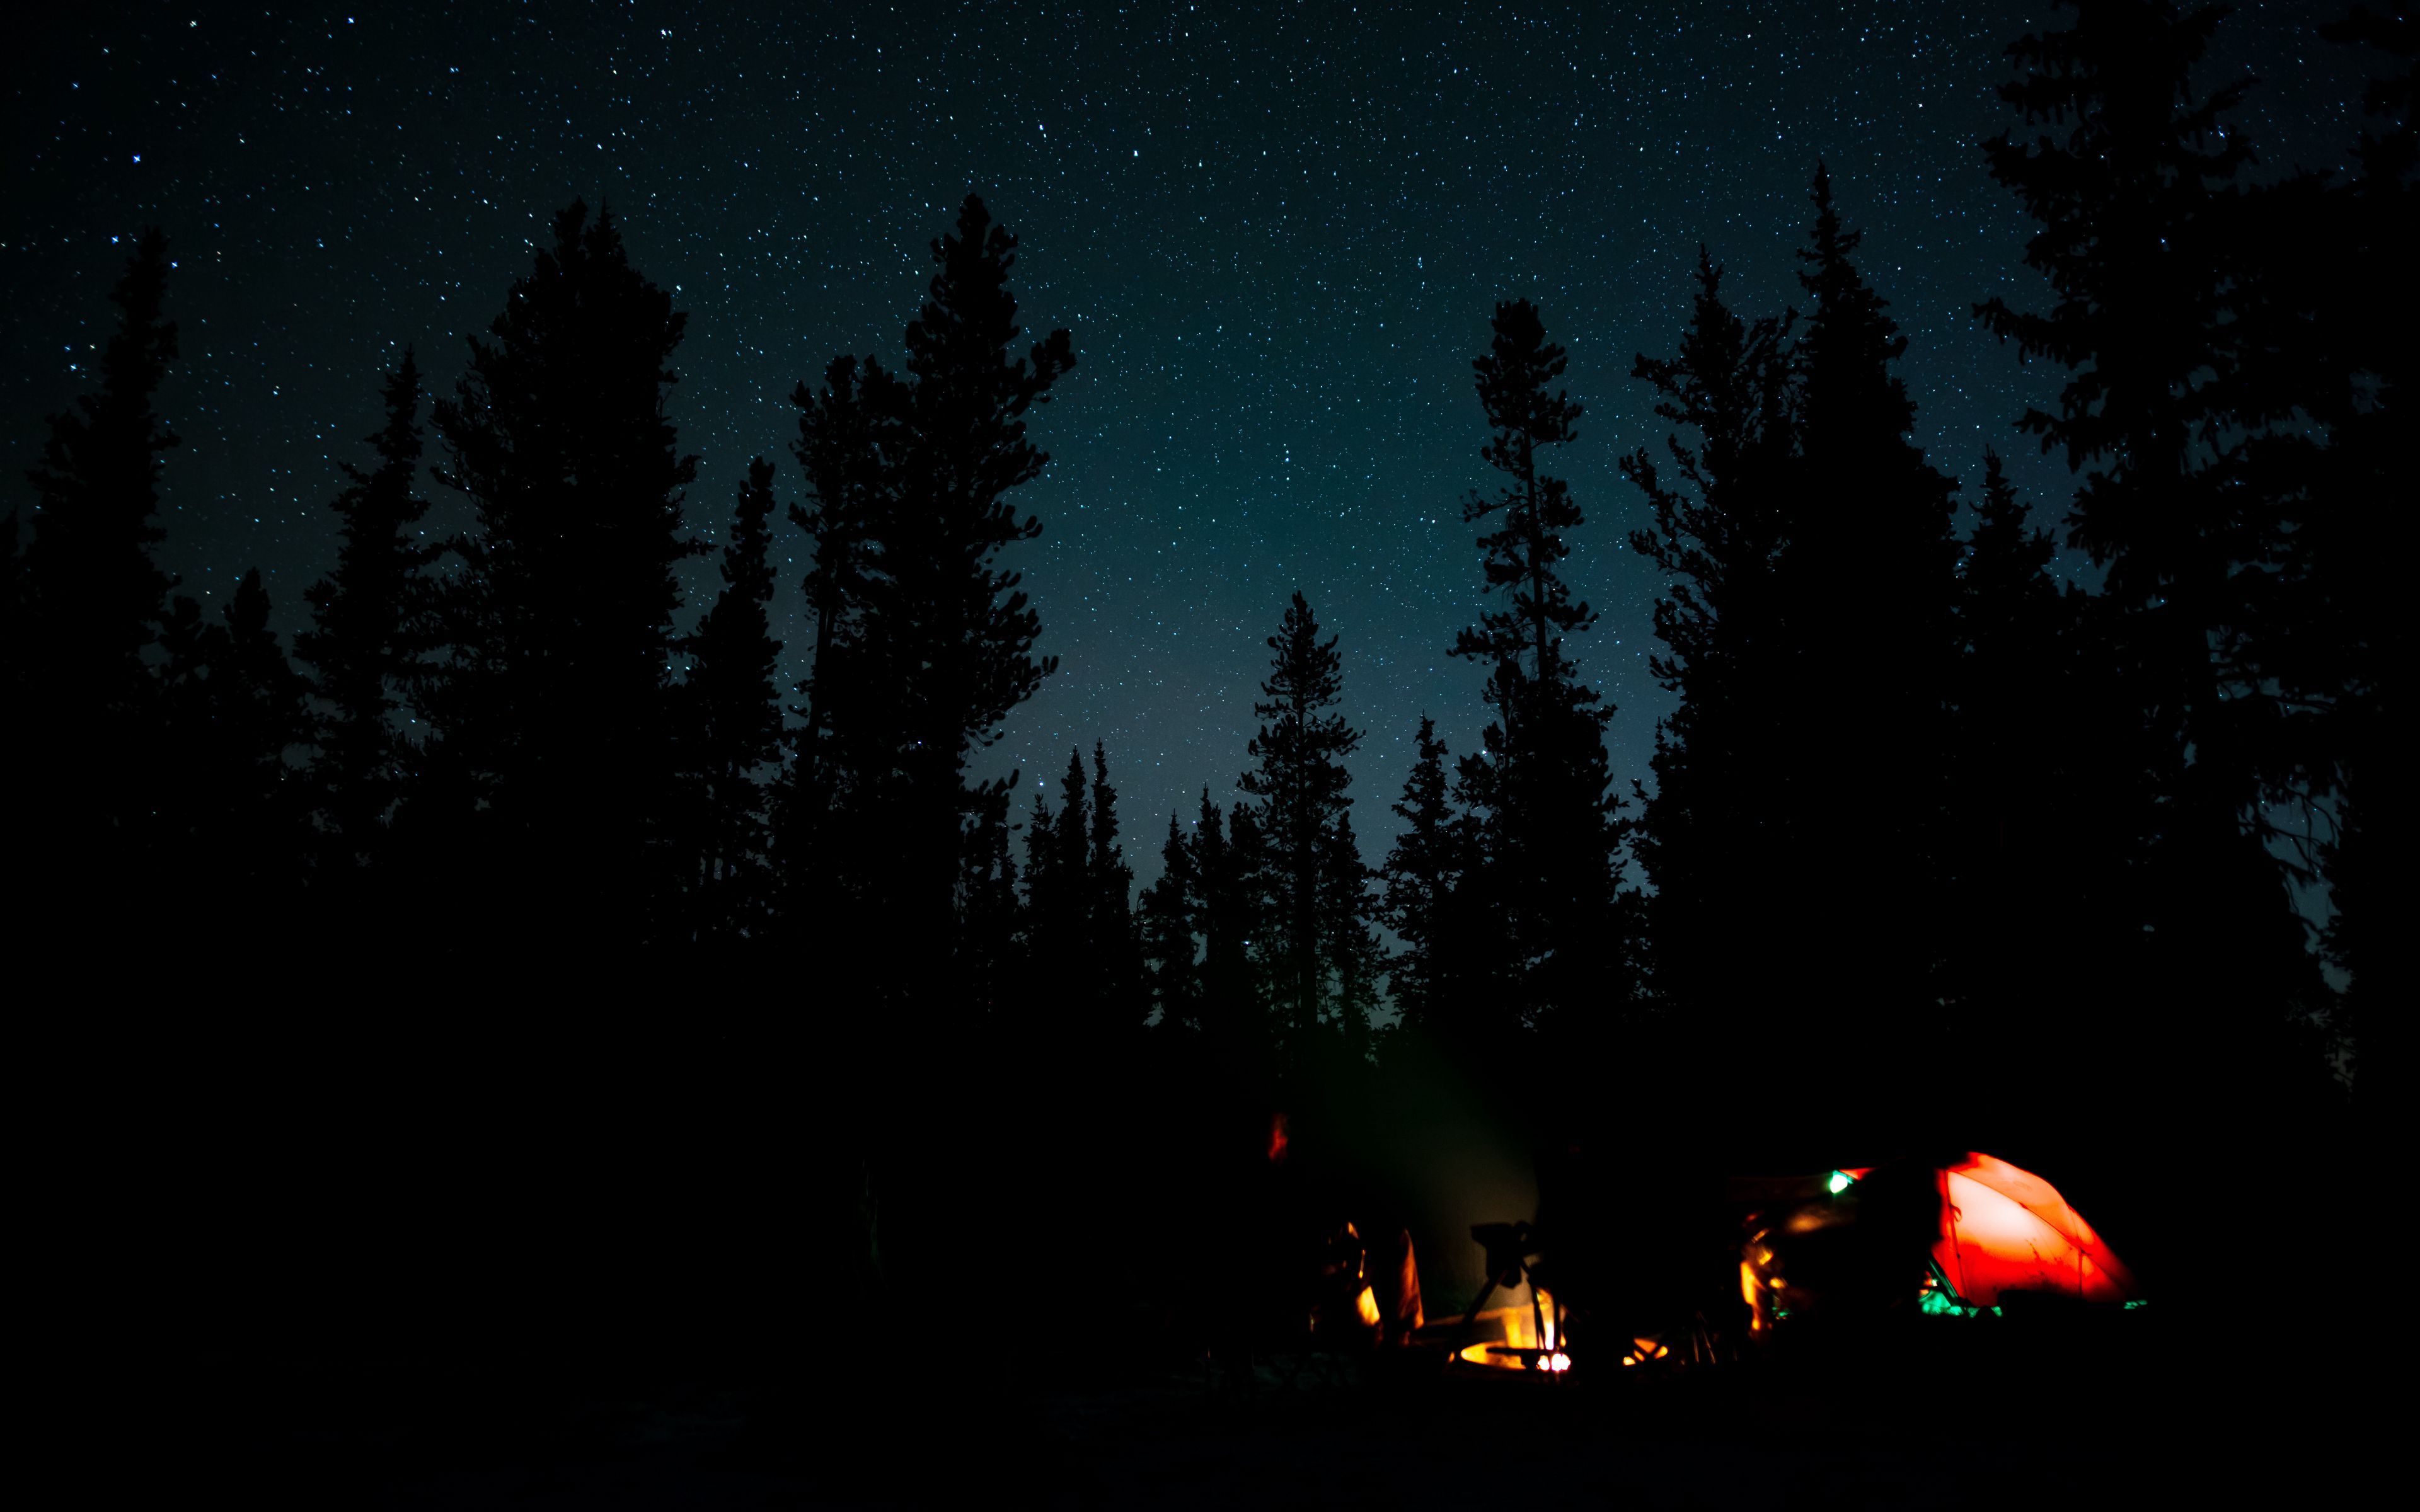 Download wallpaper 3840x2400 night, campfire, camping, forest 4k ultra HD 16:10 HD background